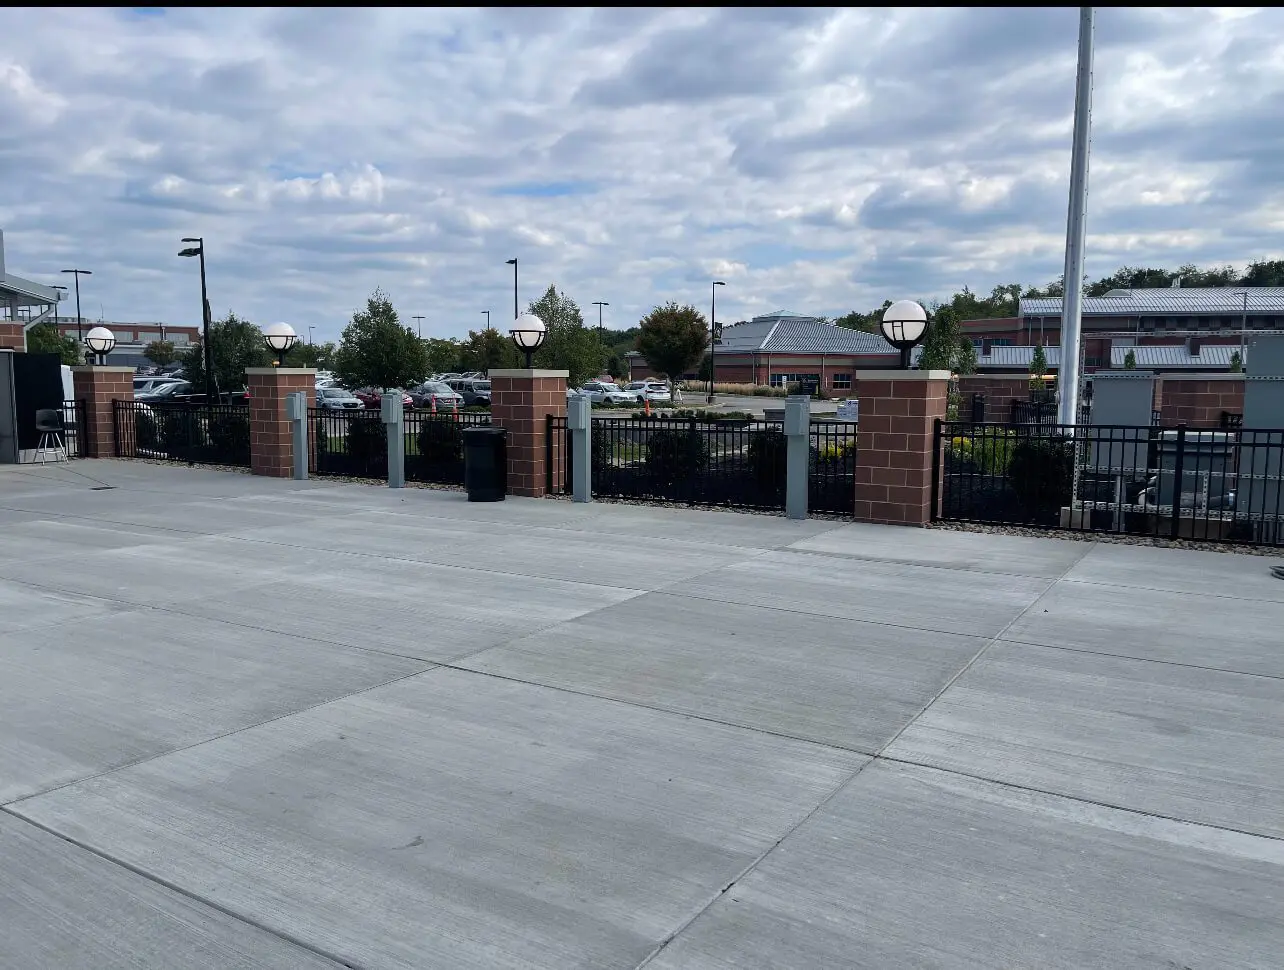 A parking lot with a fence and trash cans.